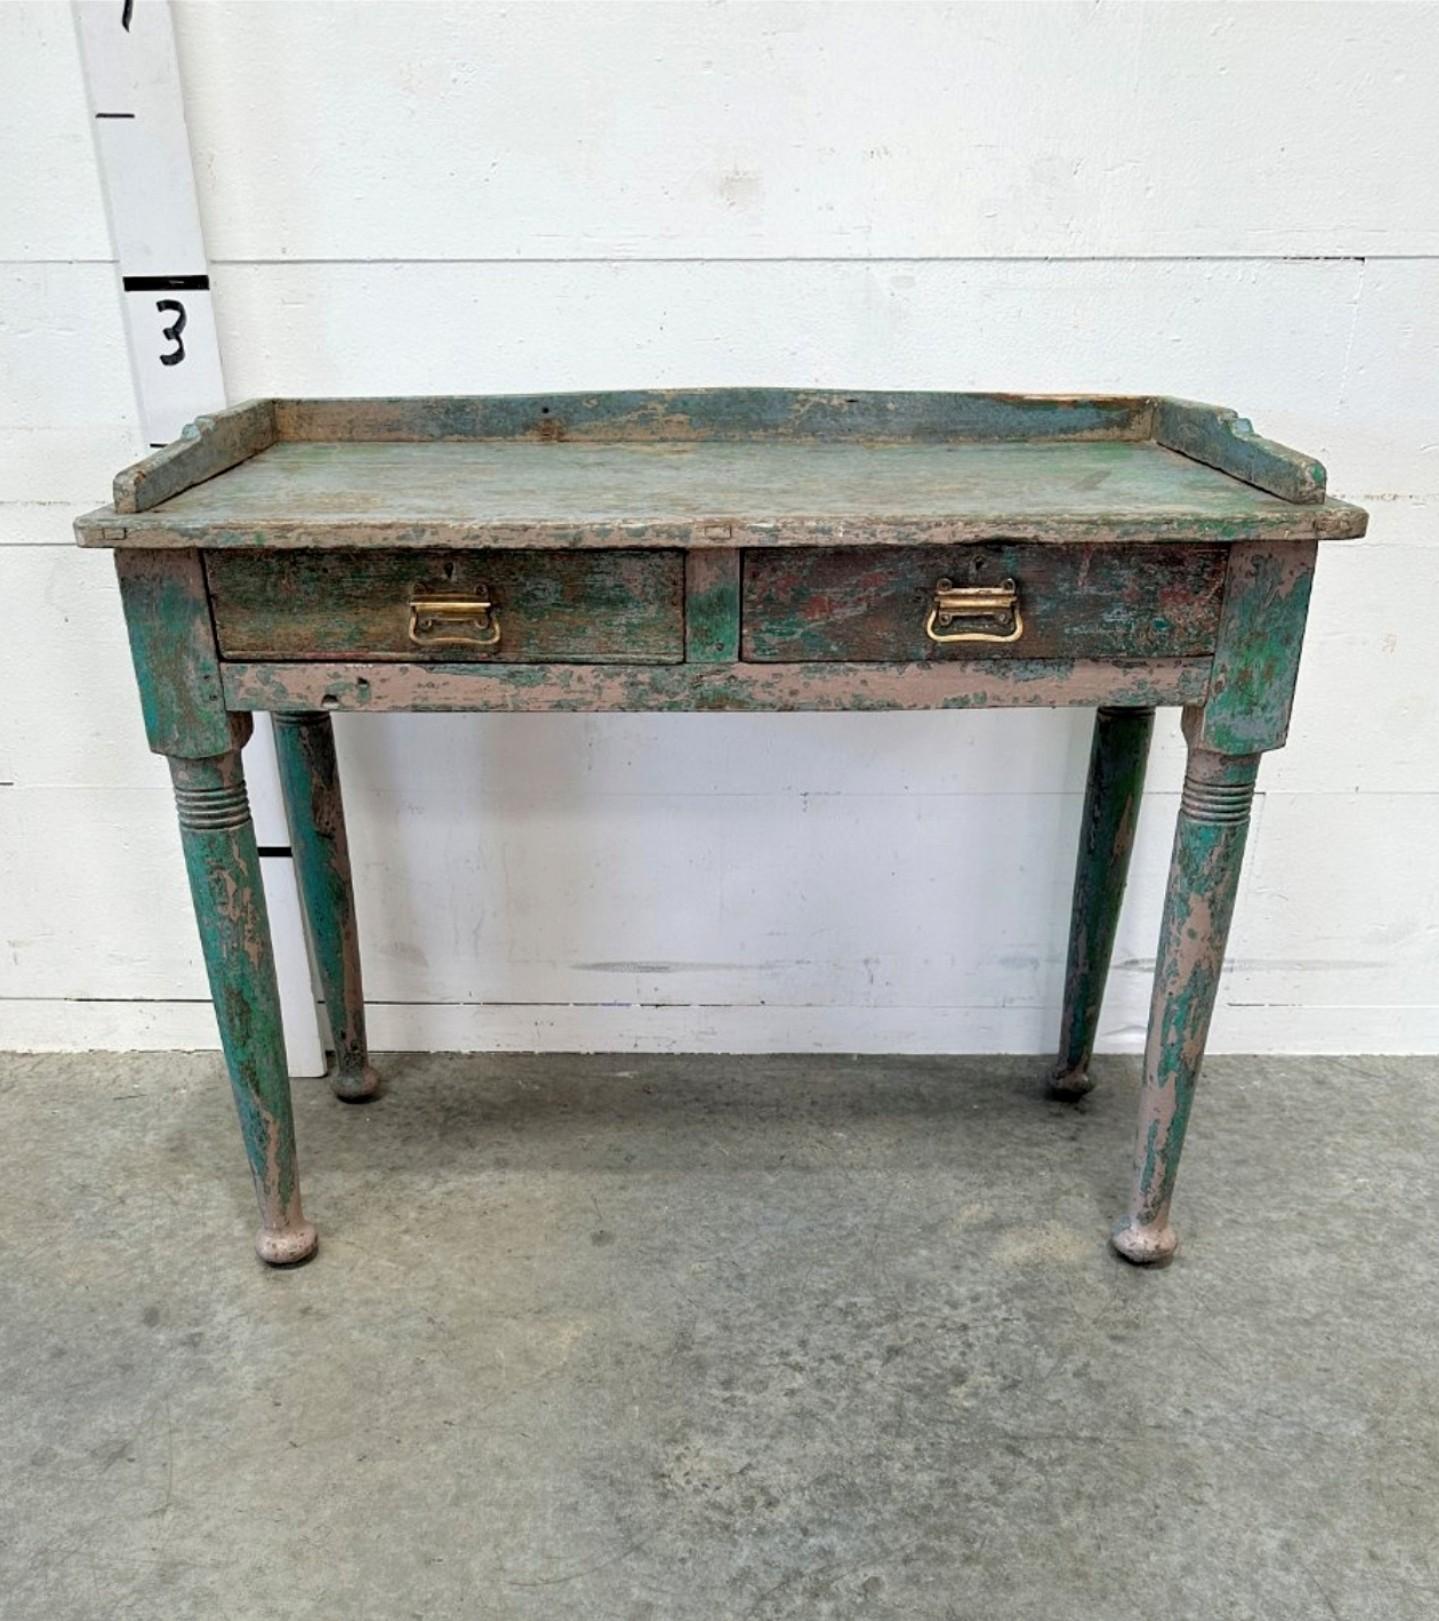 Hand-Painted 18th/19th Century European Painted Pine Farmhouse Sorting Table Server 